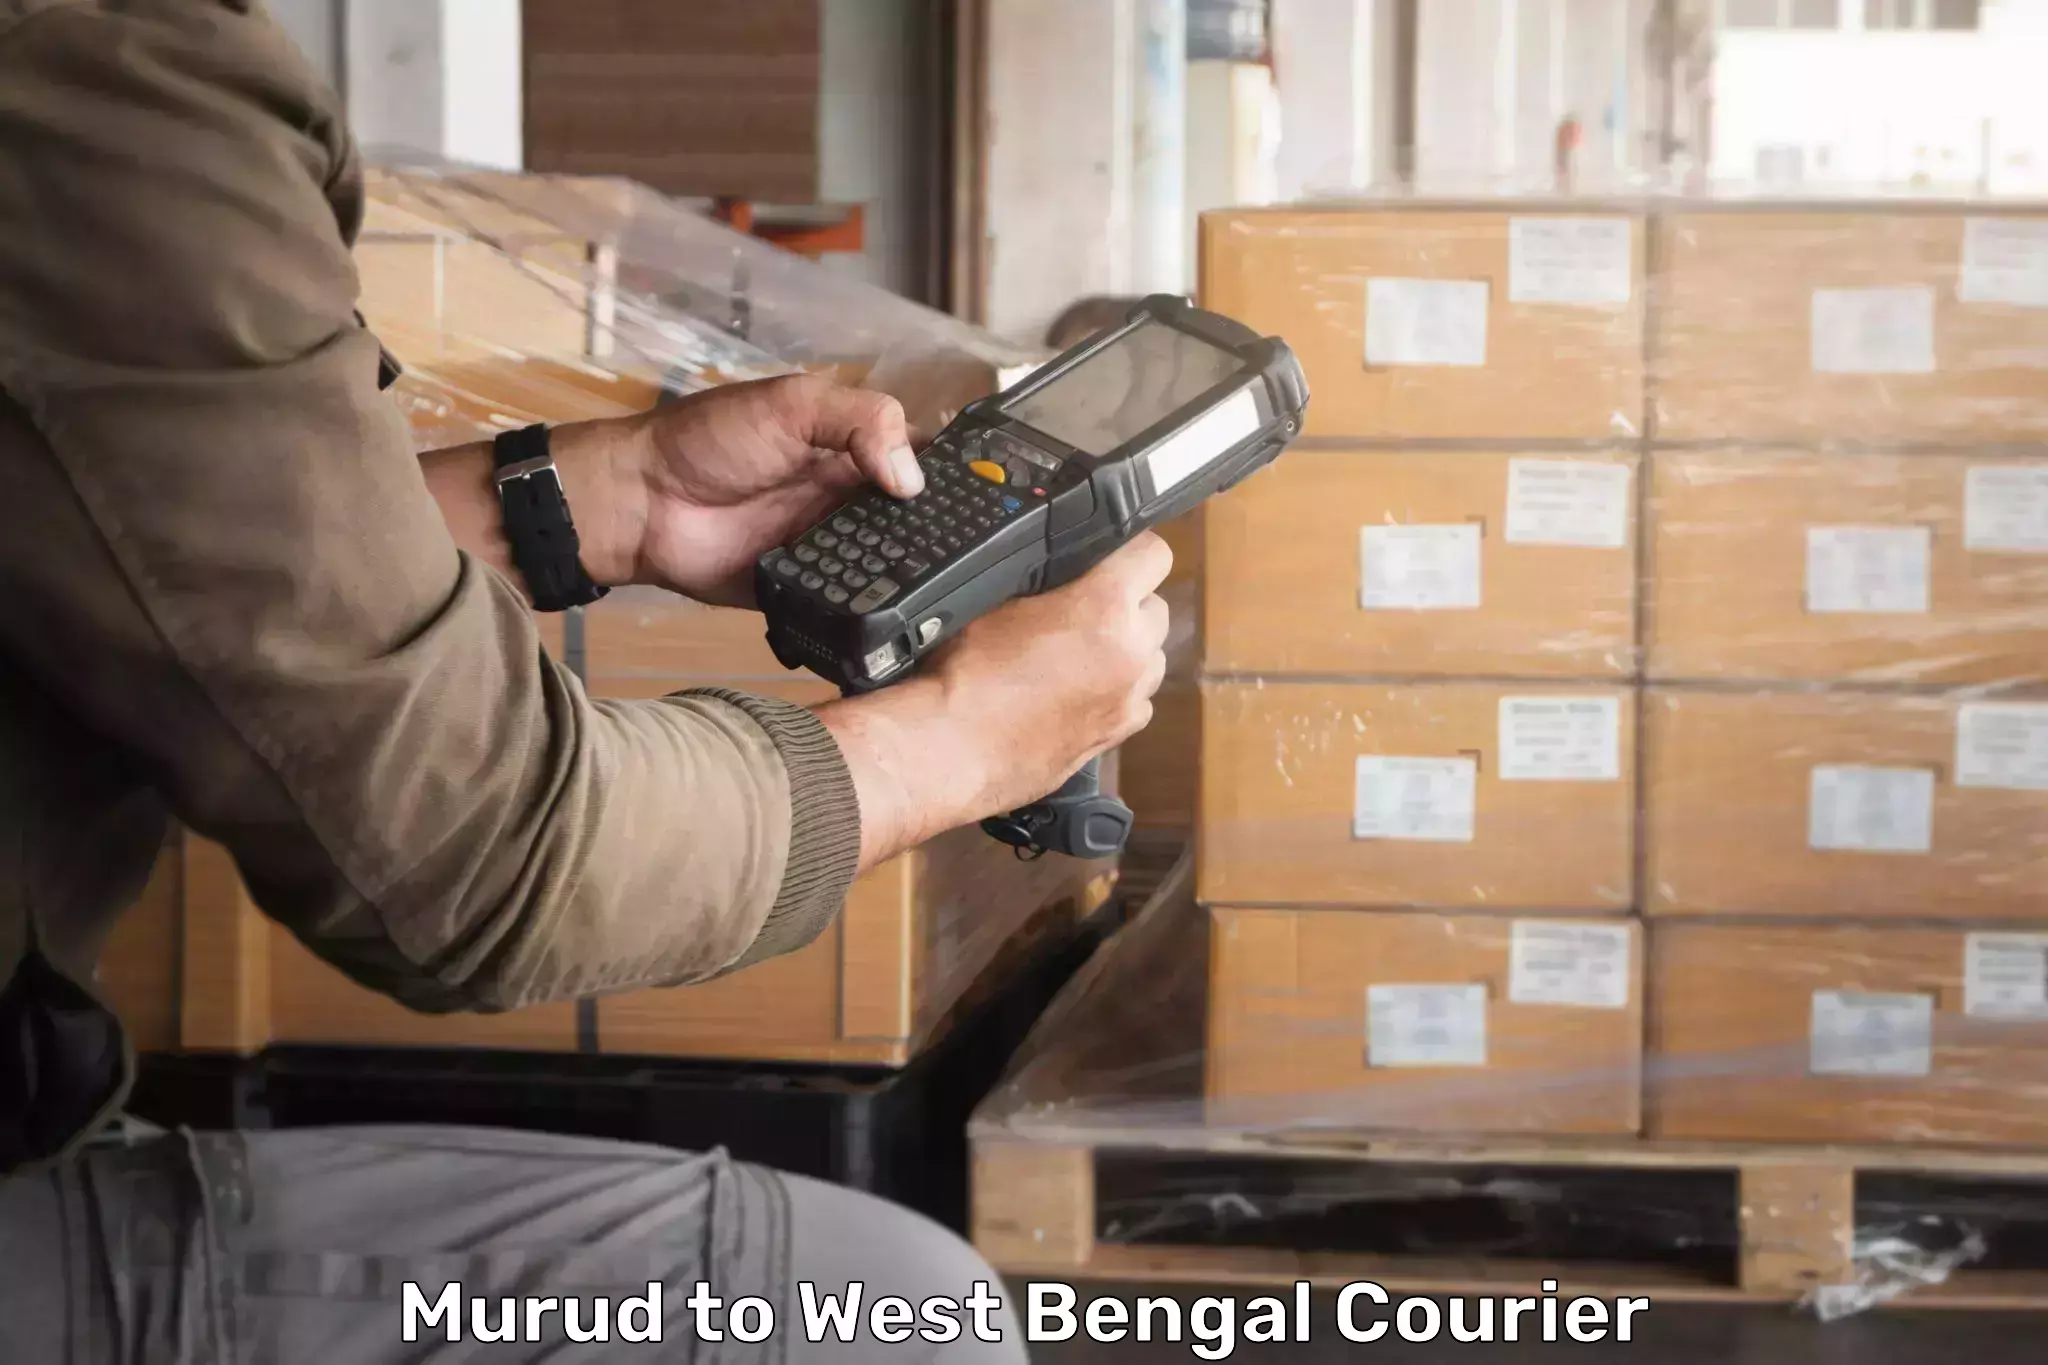 Quality courier services in Murud to South 24 Parganas